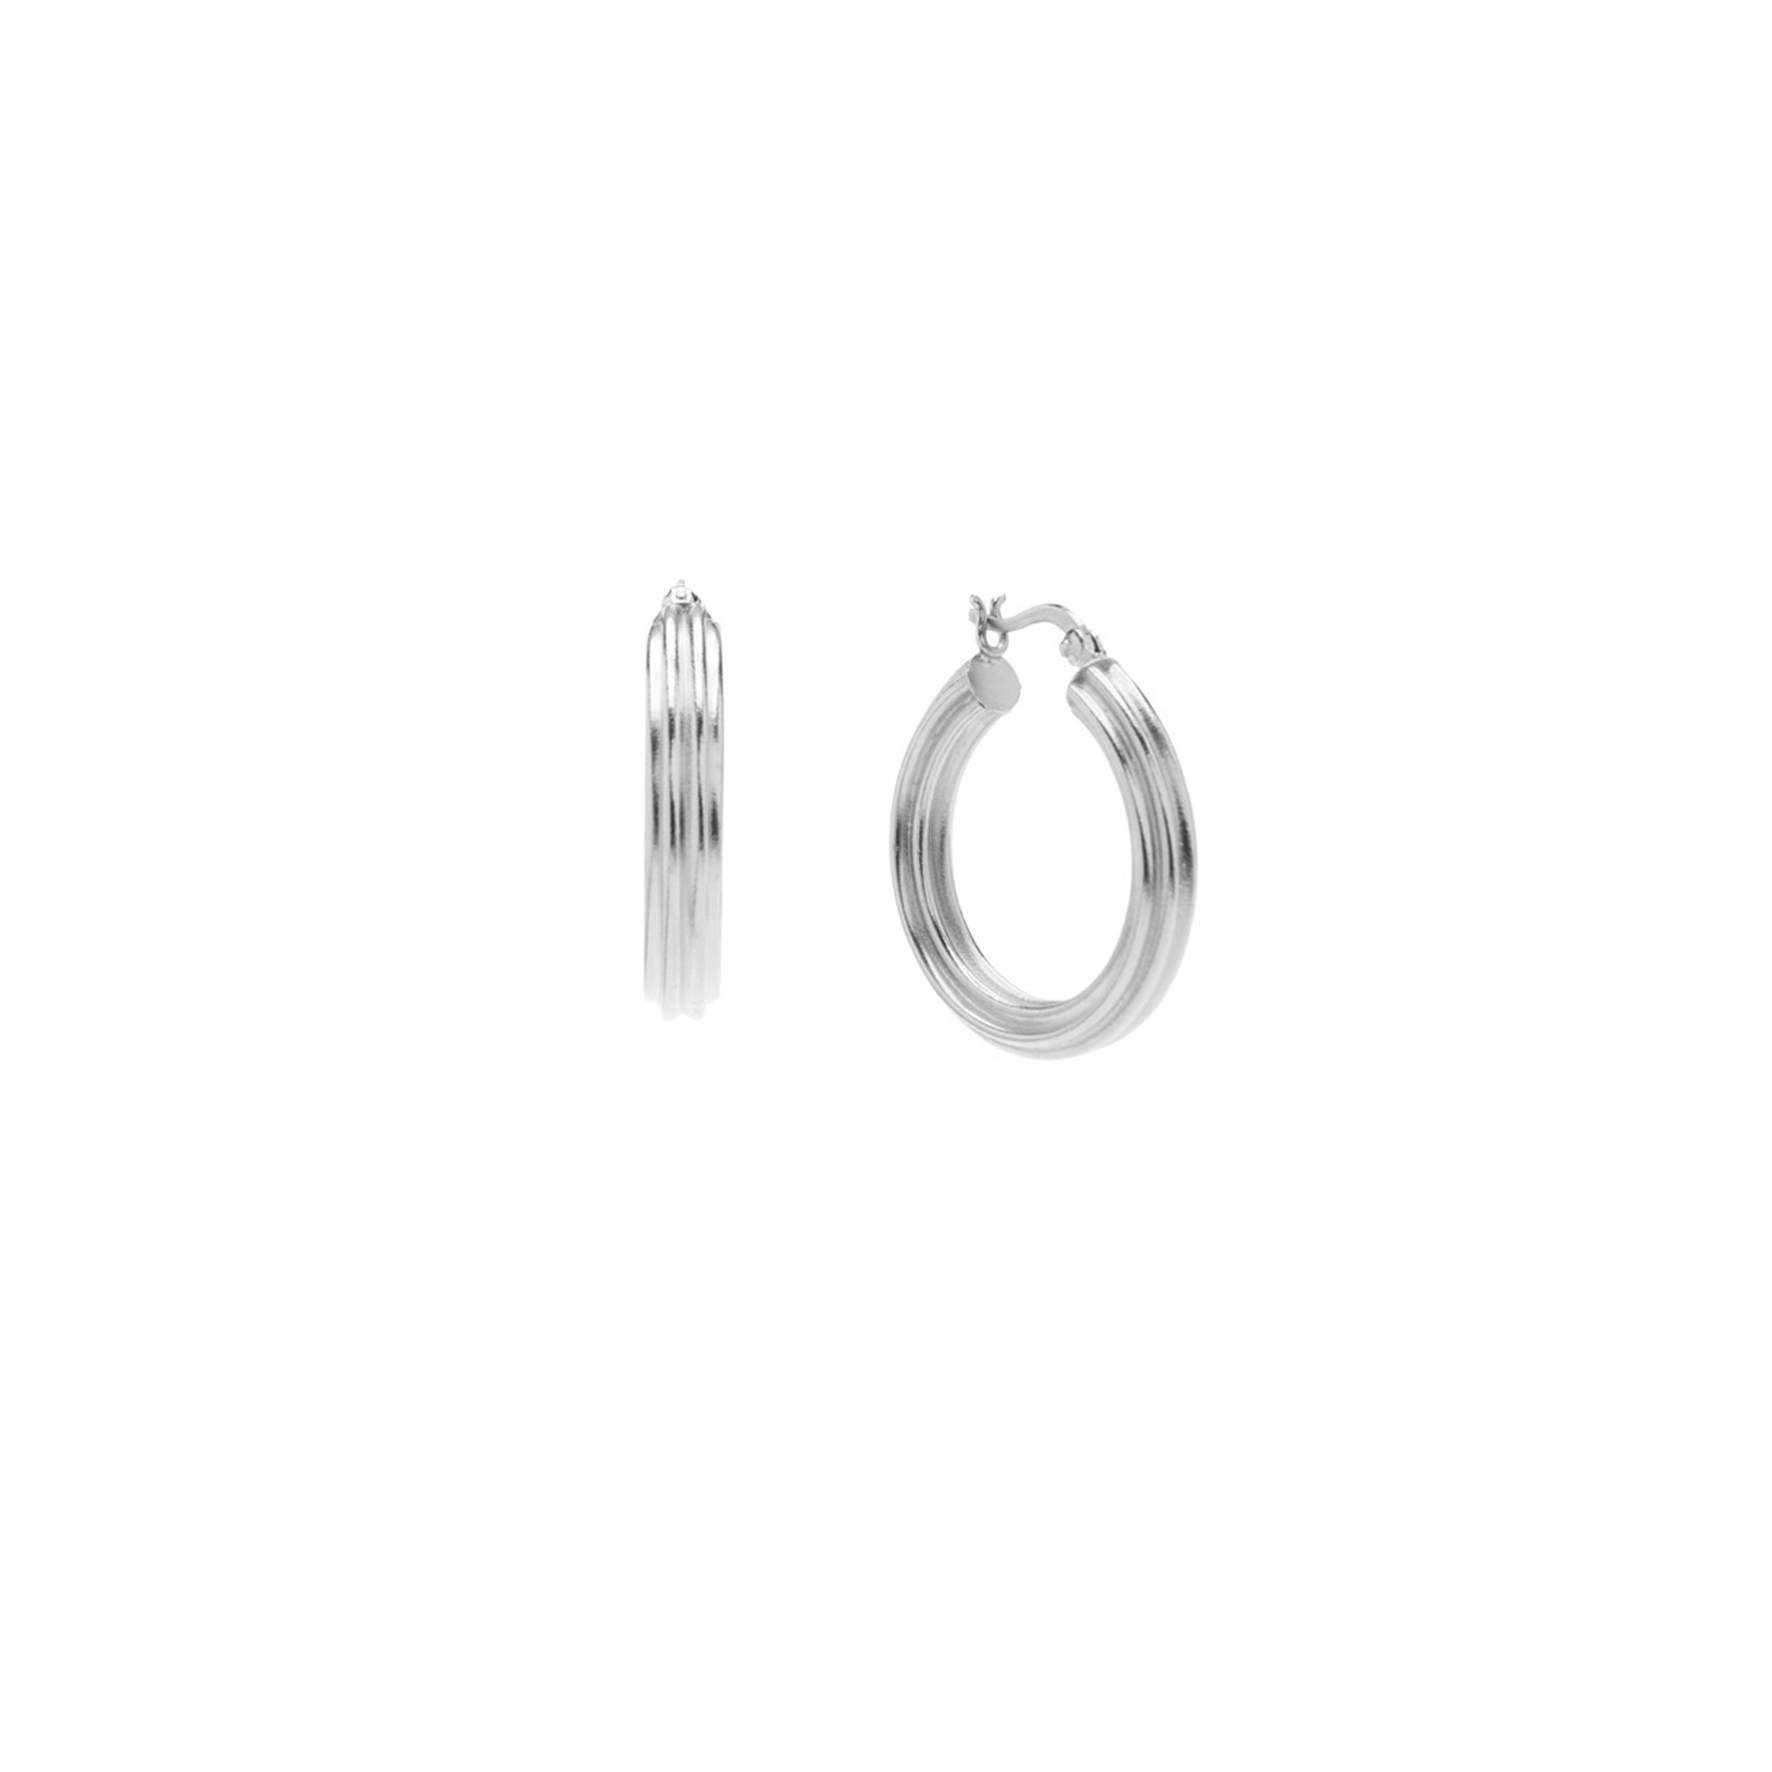 Cecilia Hoops from Pico in Silver Sterling 925